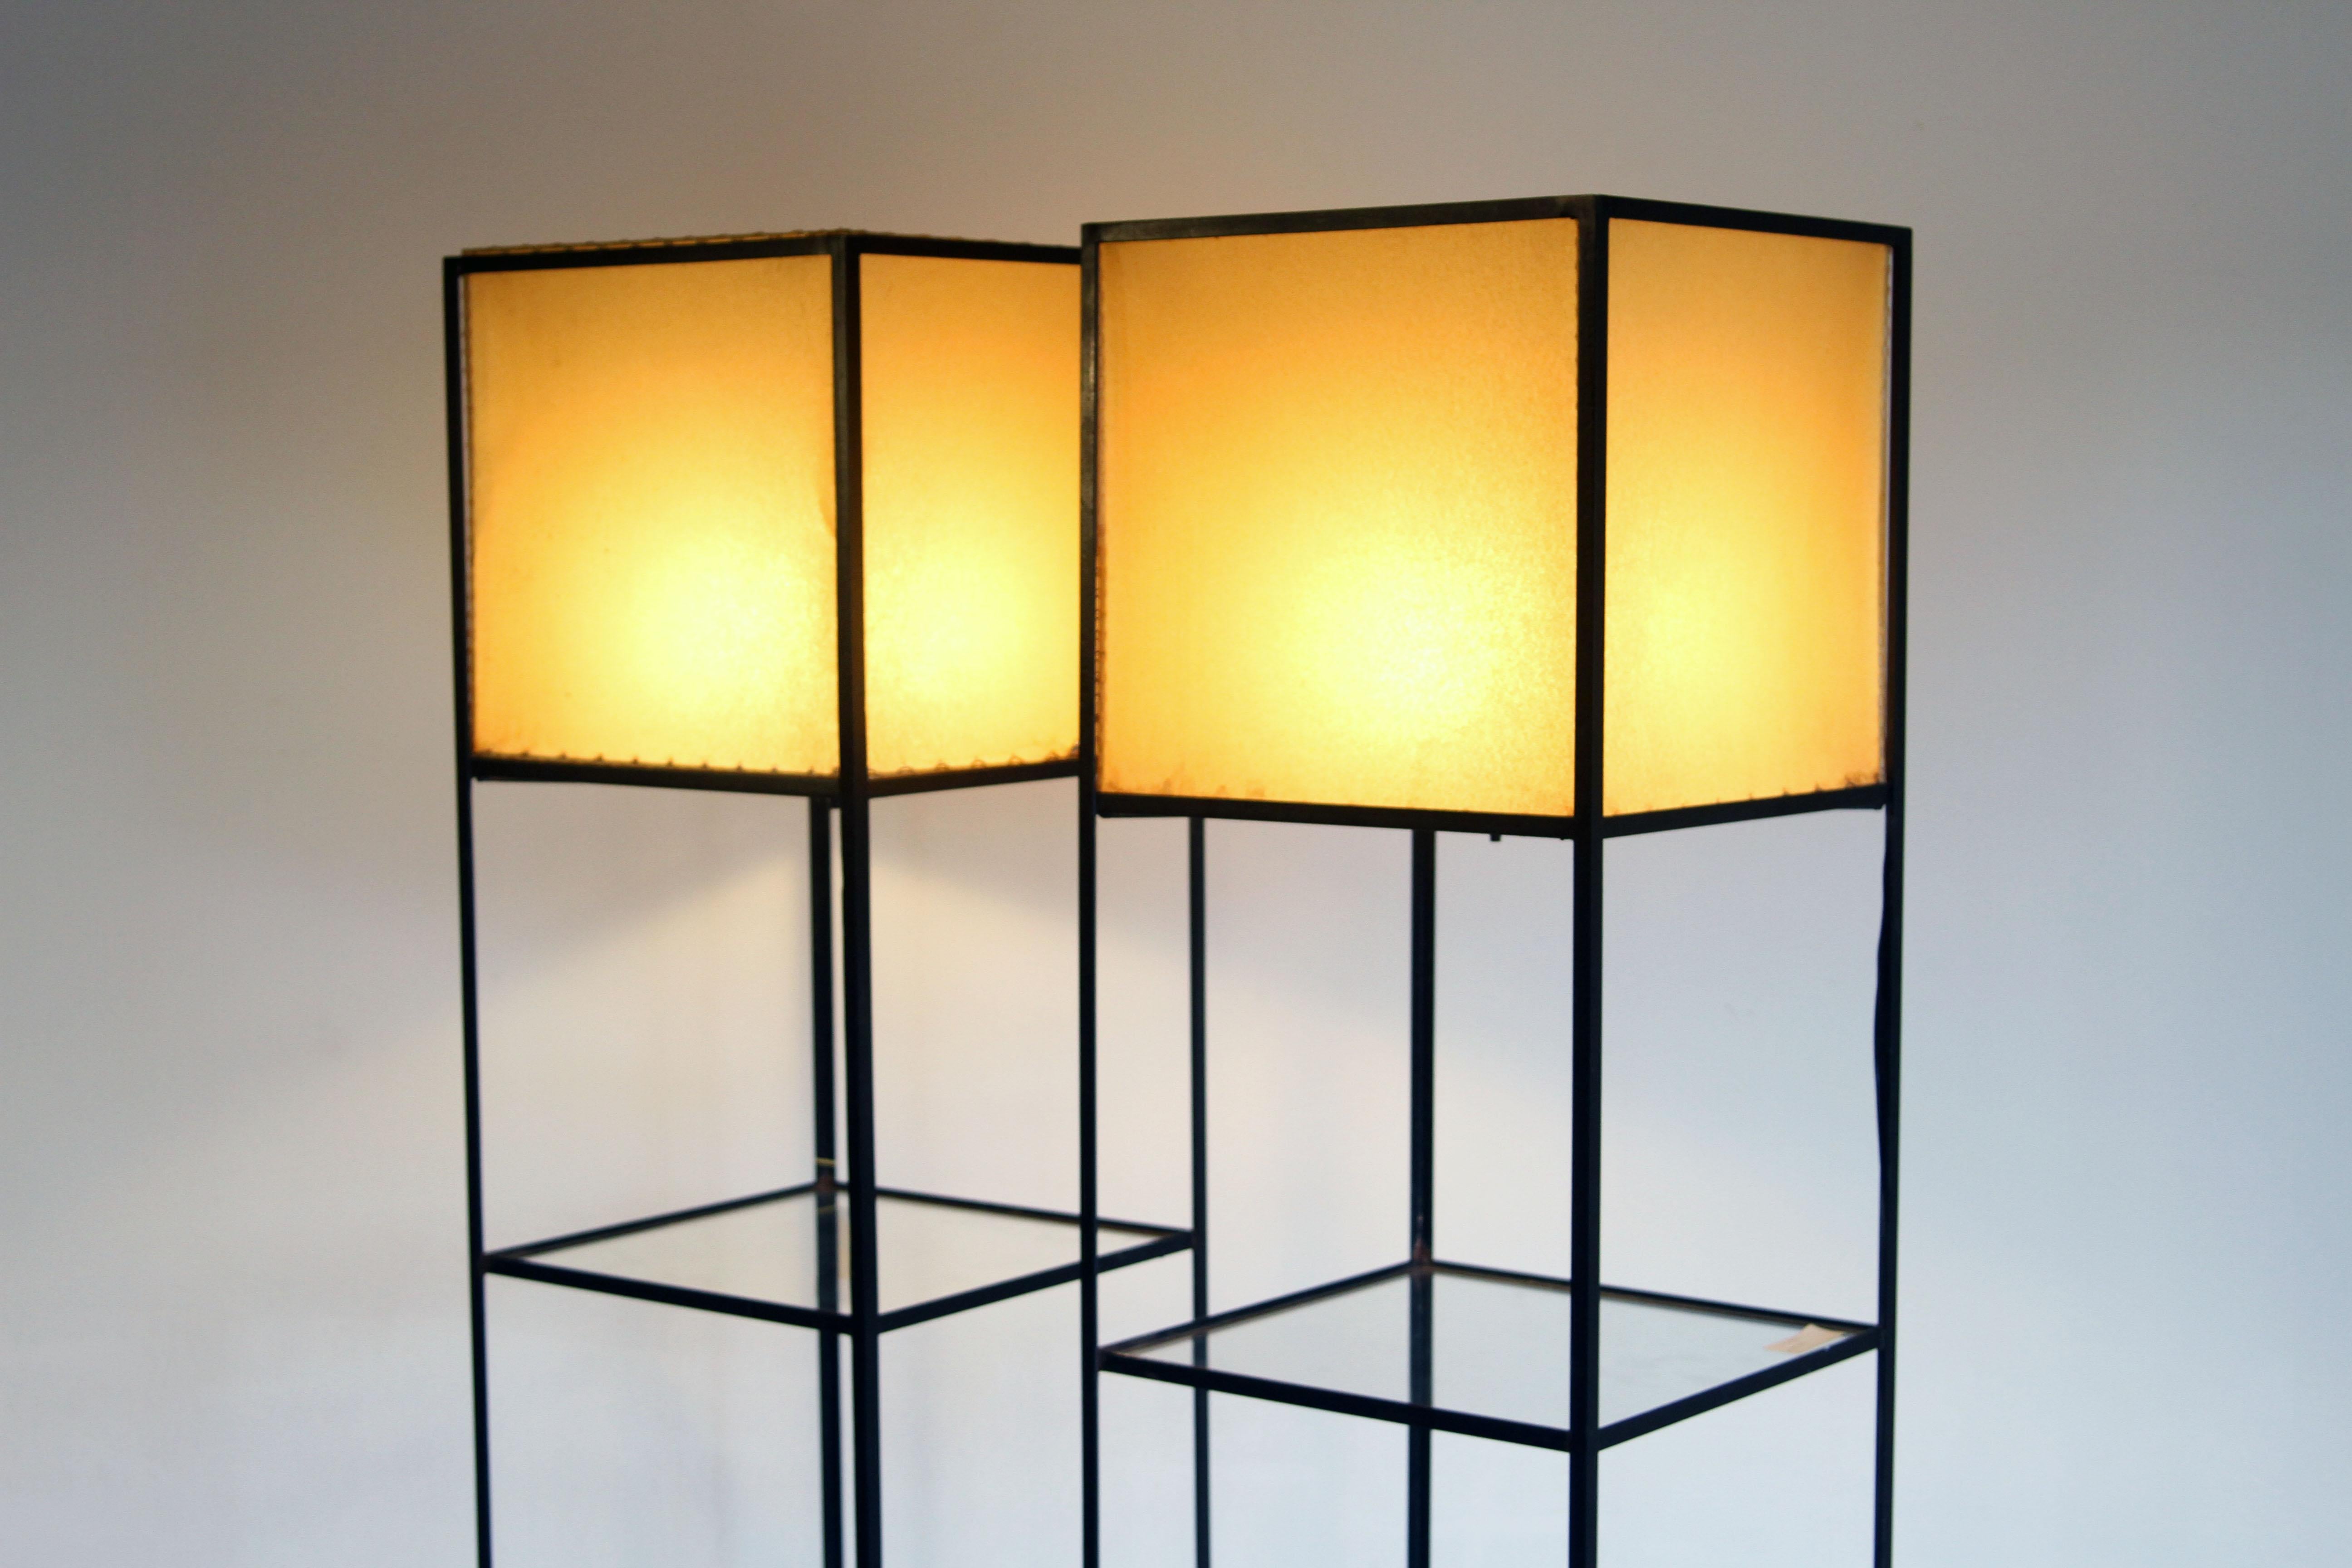 20th Century Pair of Architectural Frederick Weinberg Modern Floor Lamps with Shelves